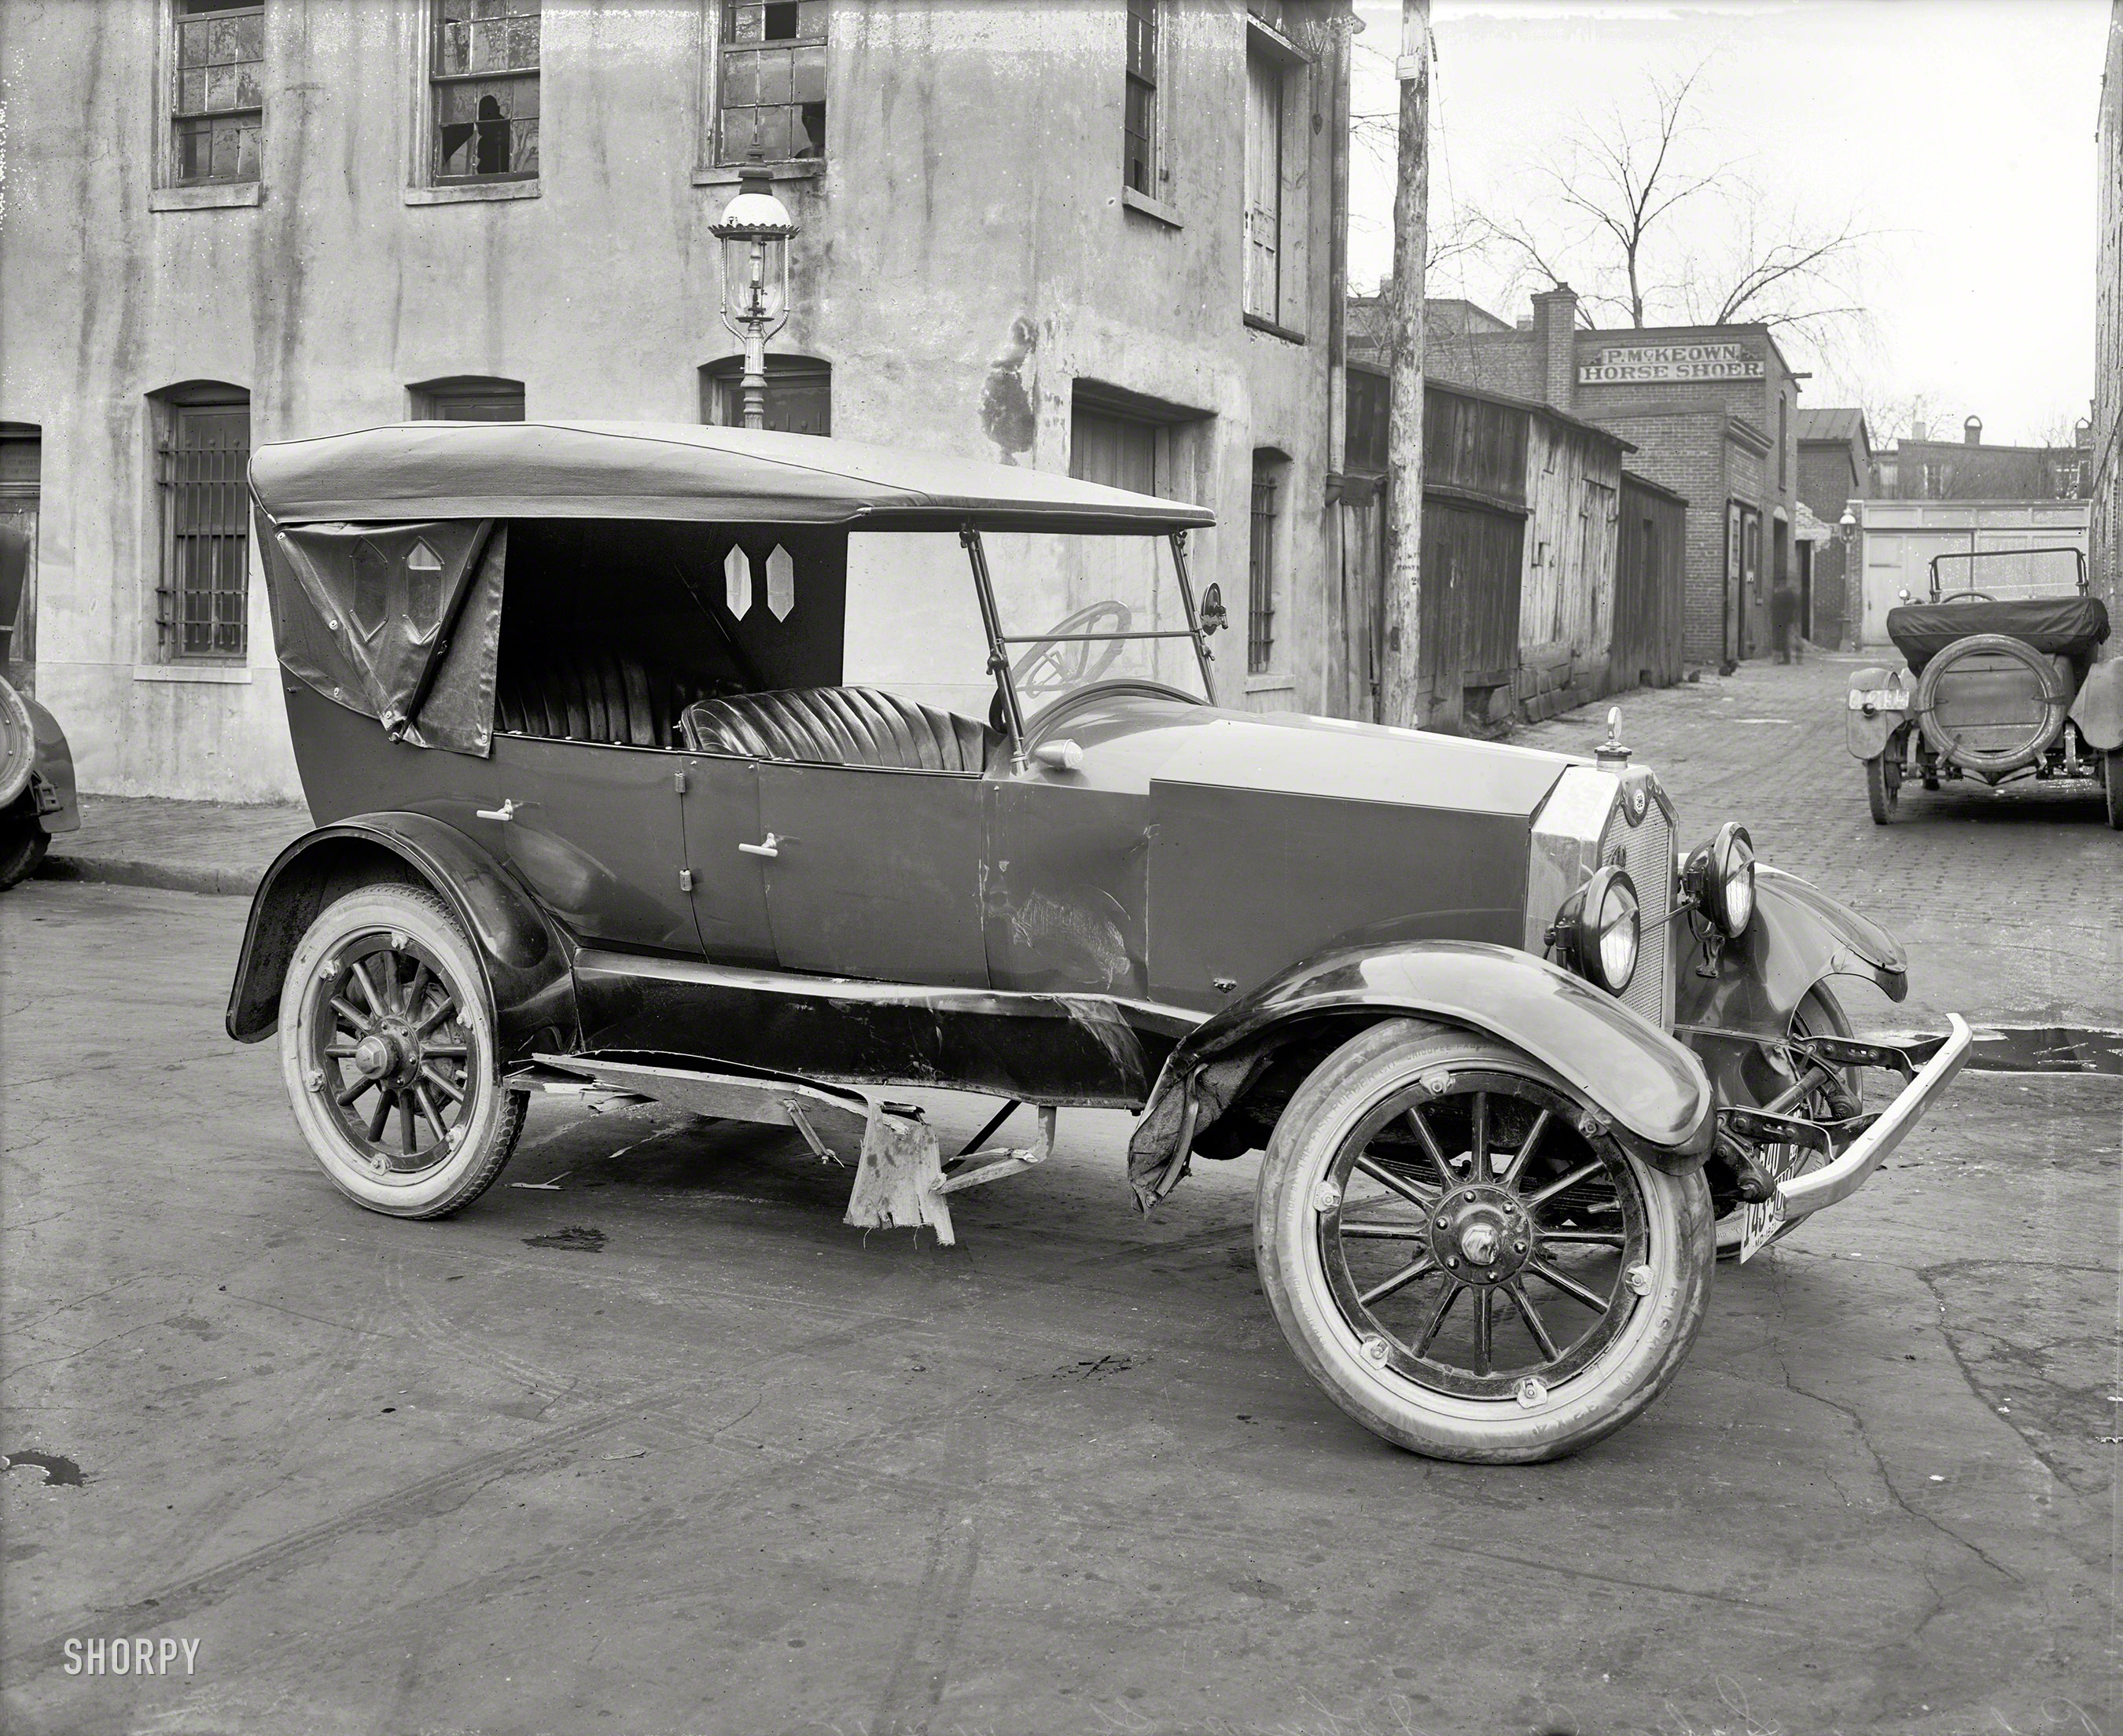 Washington, D.C., 1921. "Potomac Sales Co., wreck." Just up the alley from P. McKeown, Horse Shoer. National Photo Co. glass negative. View full size.